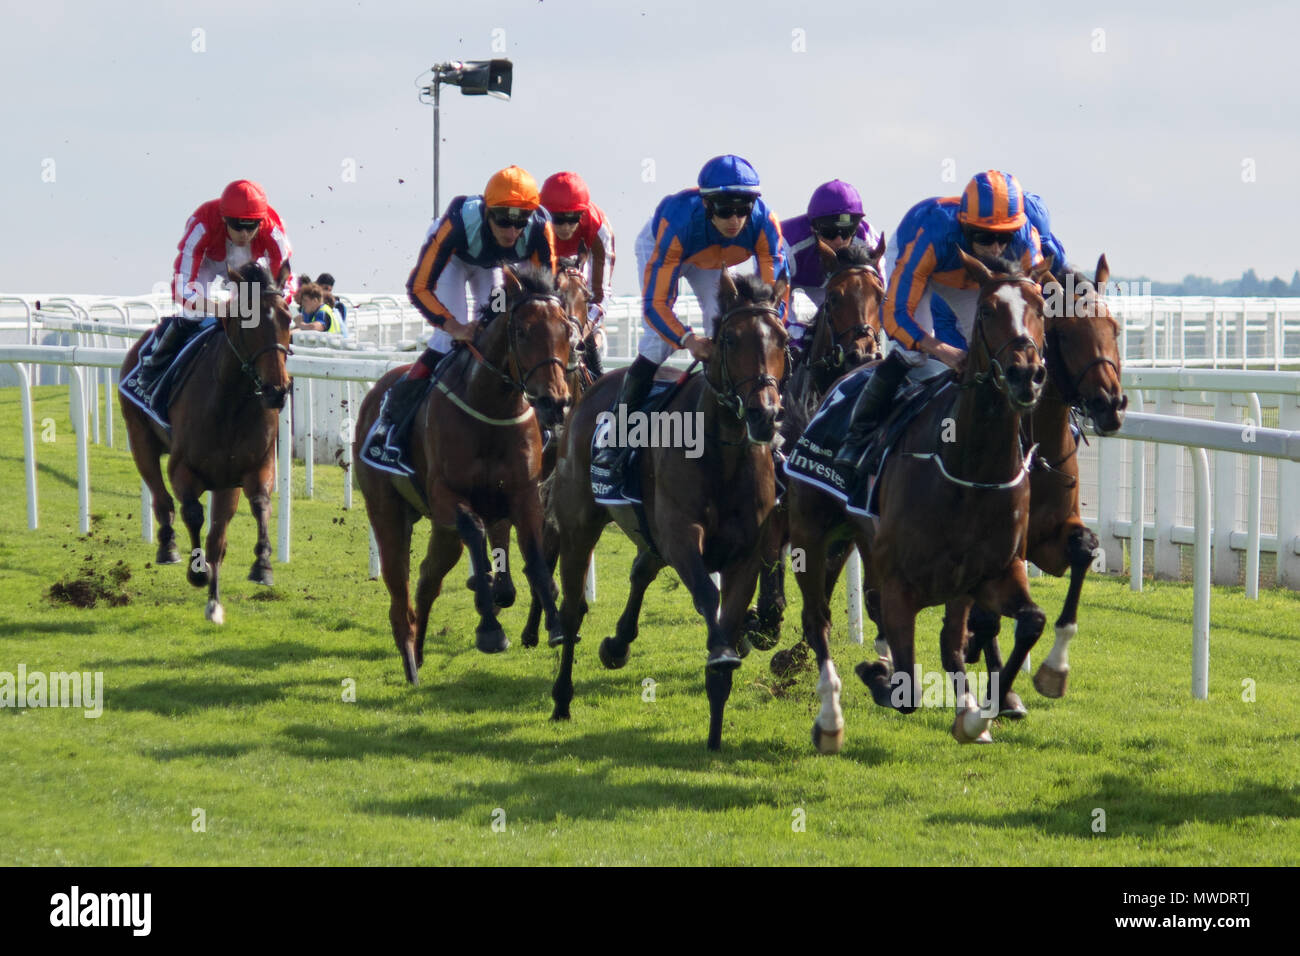 Epsom Downs Surrey UK. 1st June 2018. The Oaks at Epsom Downs. Eventual winner Forever Together ridden by Donnacha O’Brien in orange and blue stripes with blue cap is well placed with five furlongs to go. Credit: Julia Gavin/Alamy Live News Stock Photo